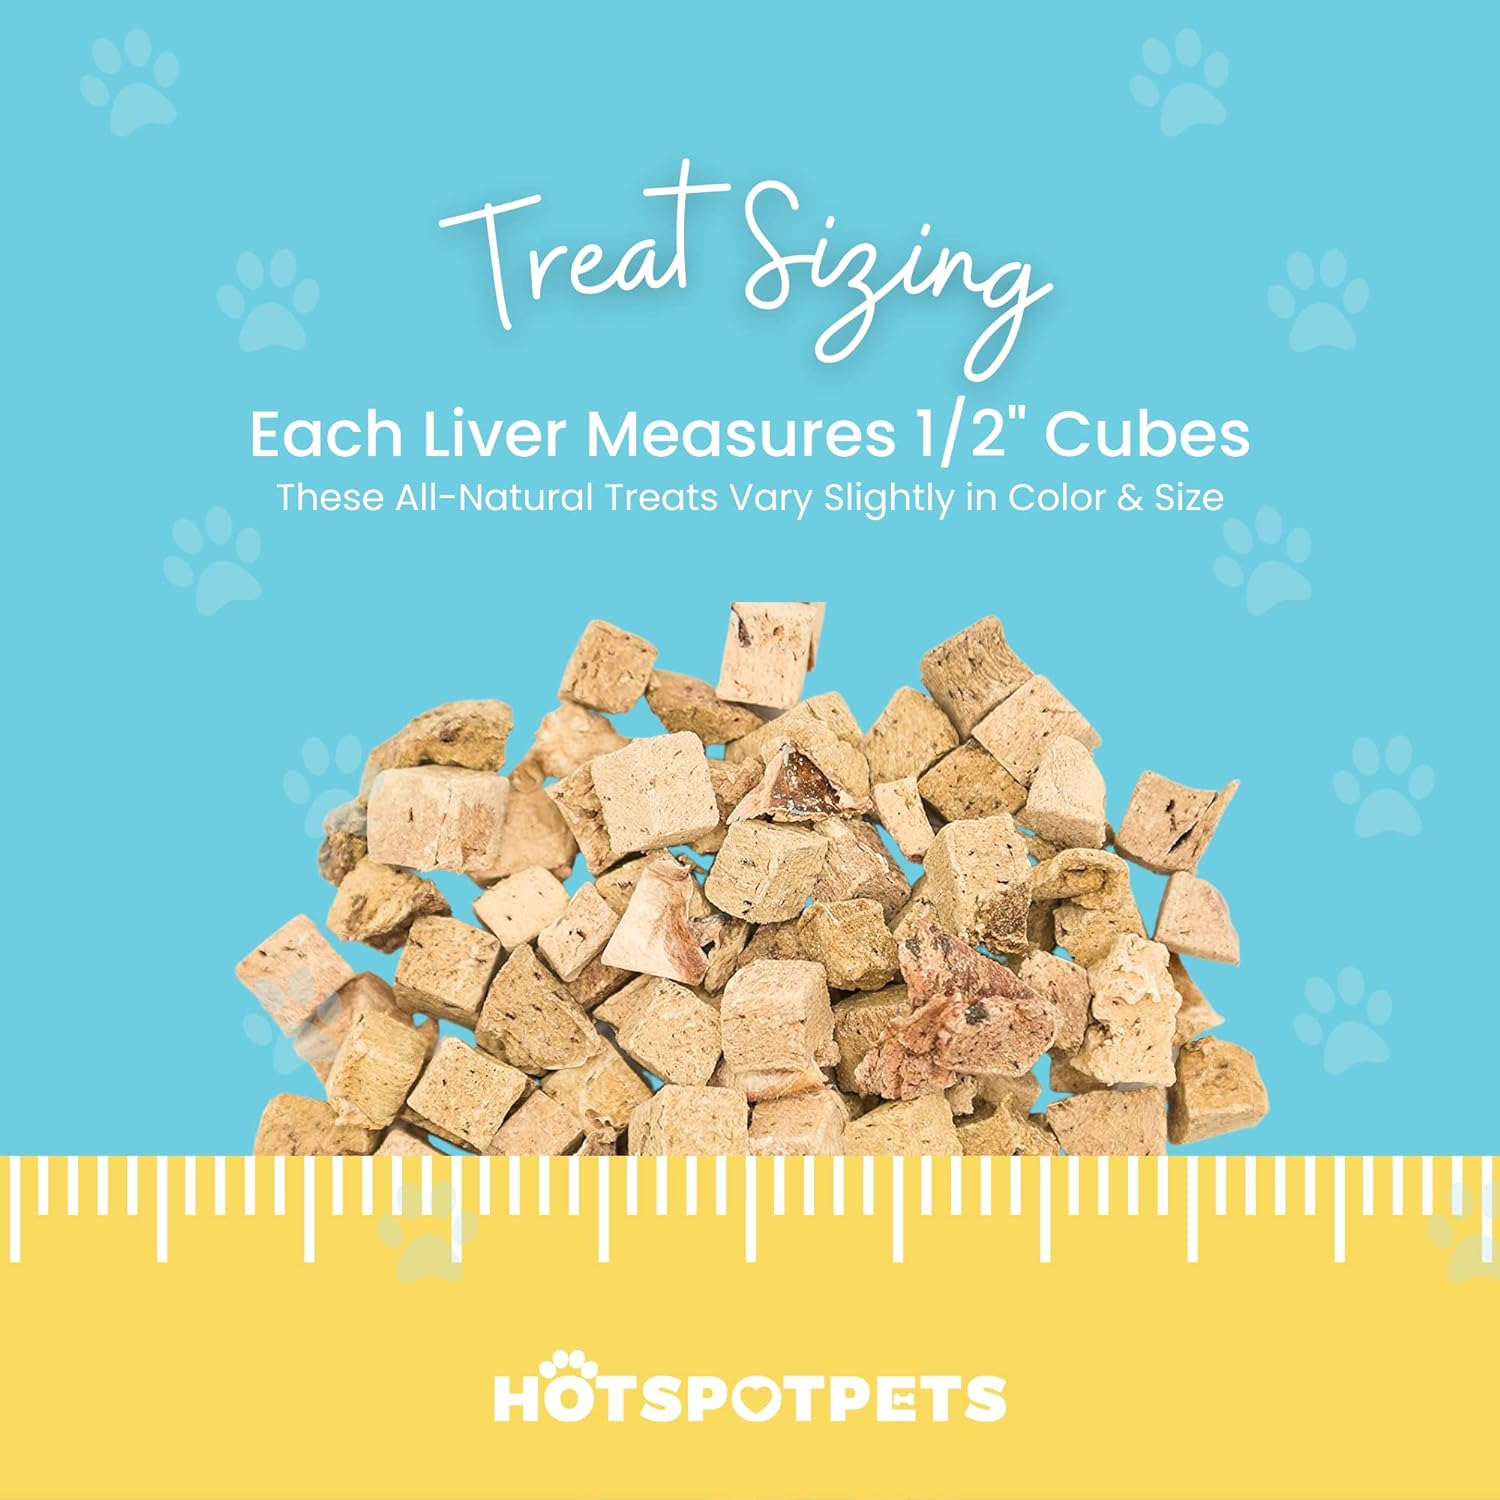 hotspot pets Freeze Dried Beef Heart Treats for Cats & Dogs - Single Ingredient All Natural Grain-Free Beef Heart - Perfect for Training, Topper or Snack - Made in USA - 1LB Bag : Pet Supplies